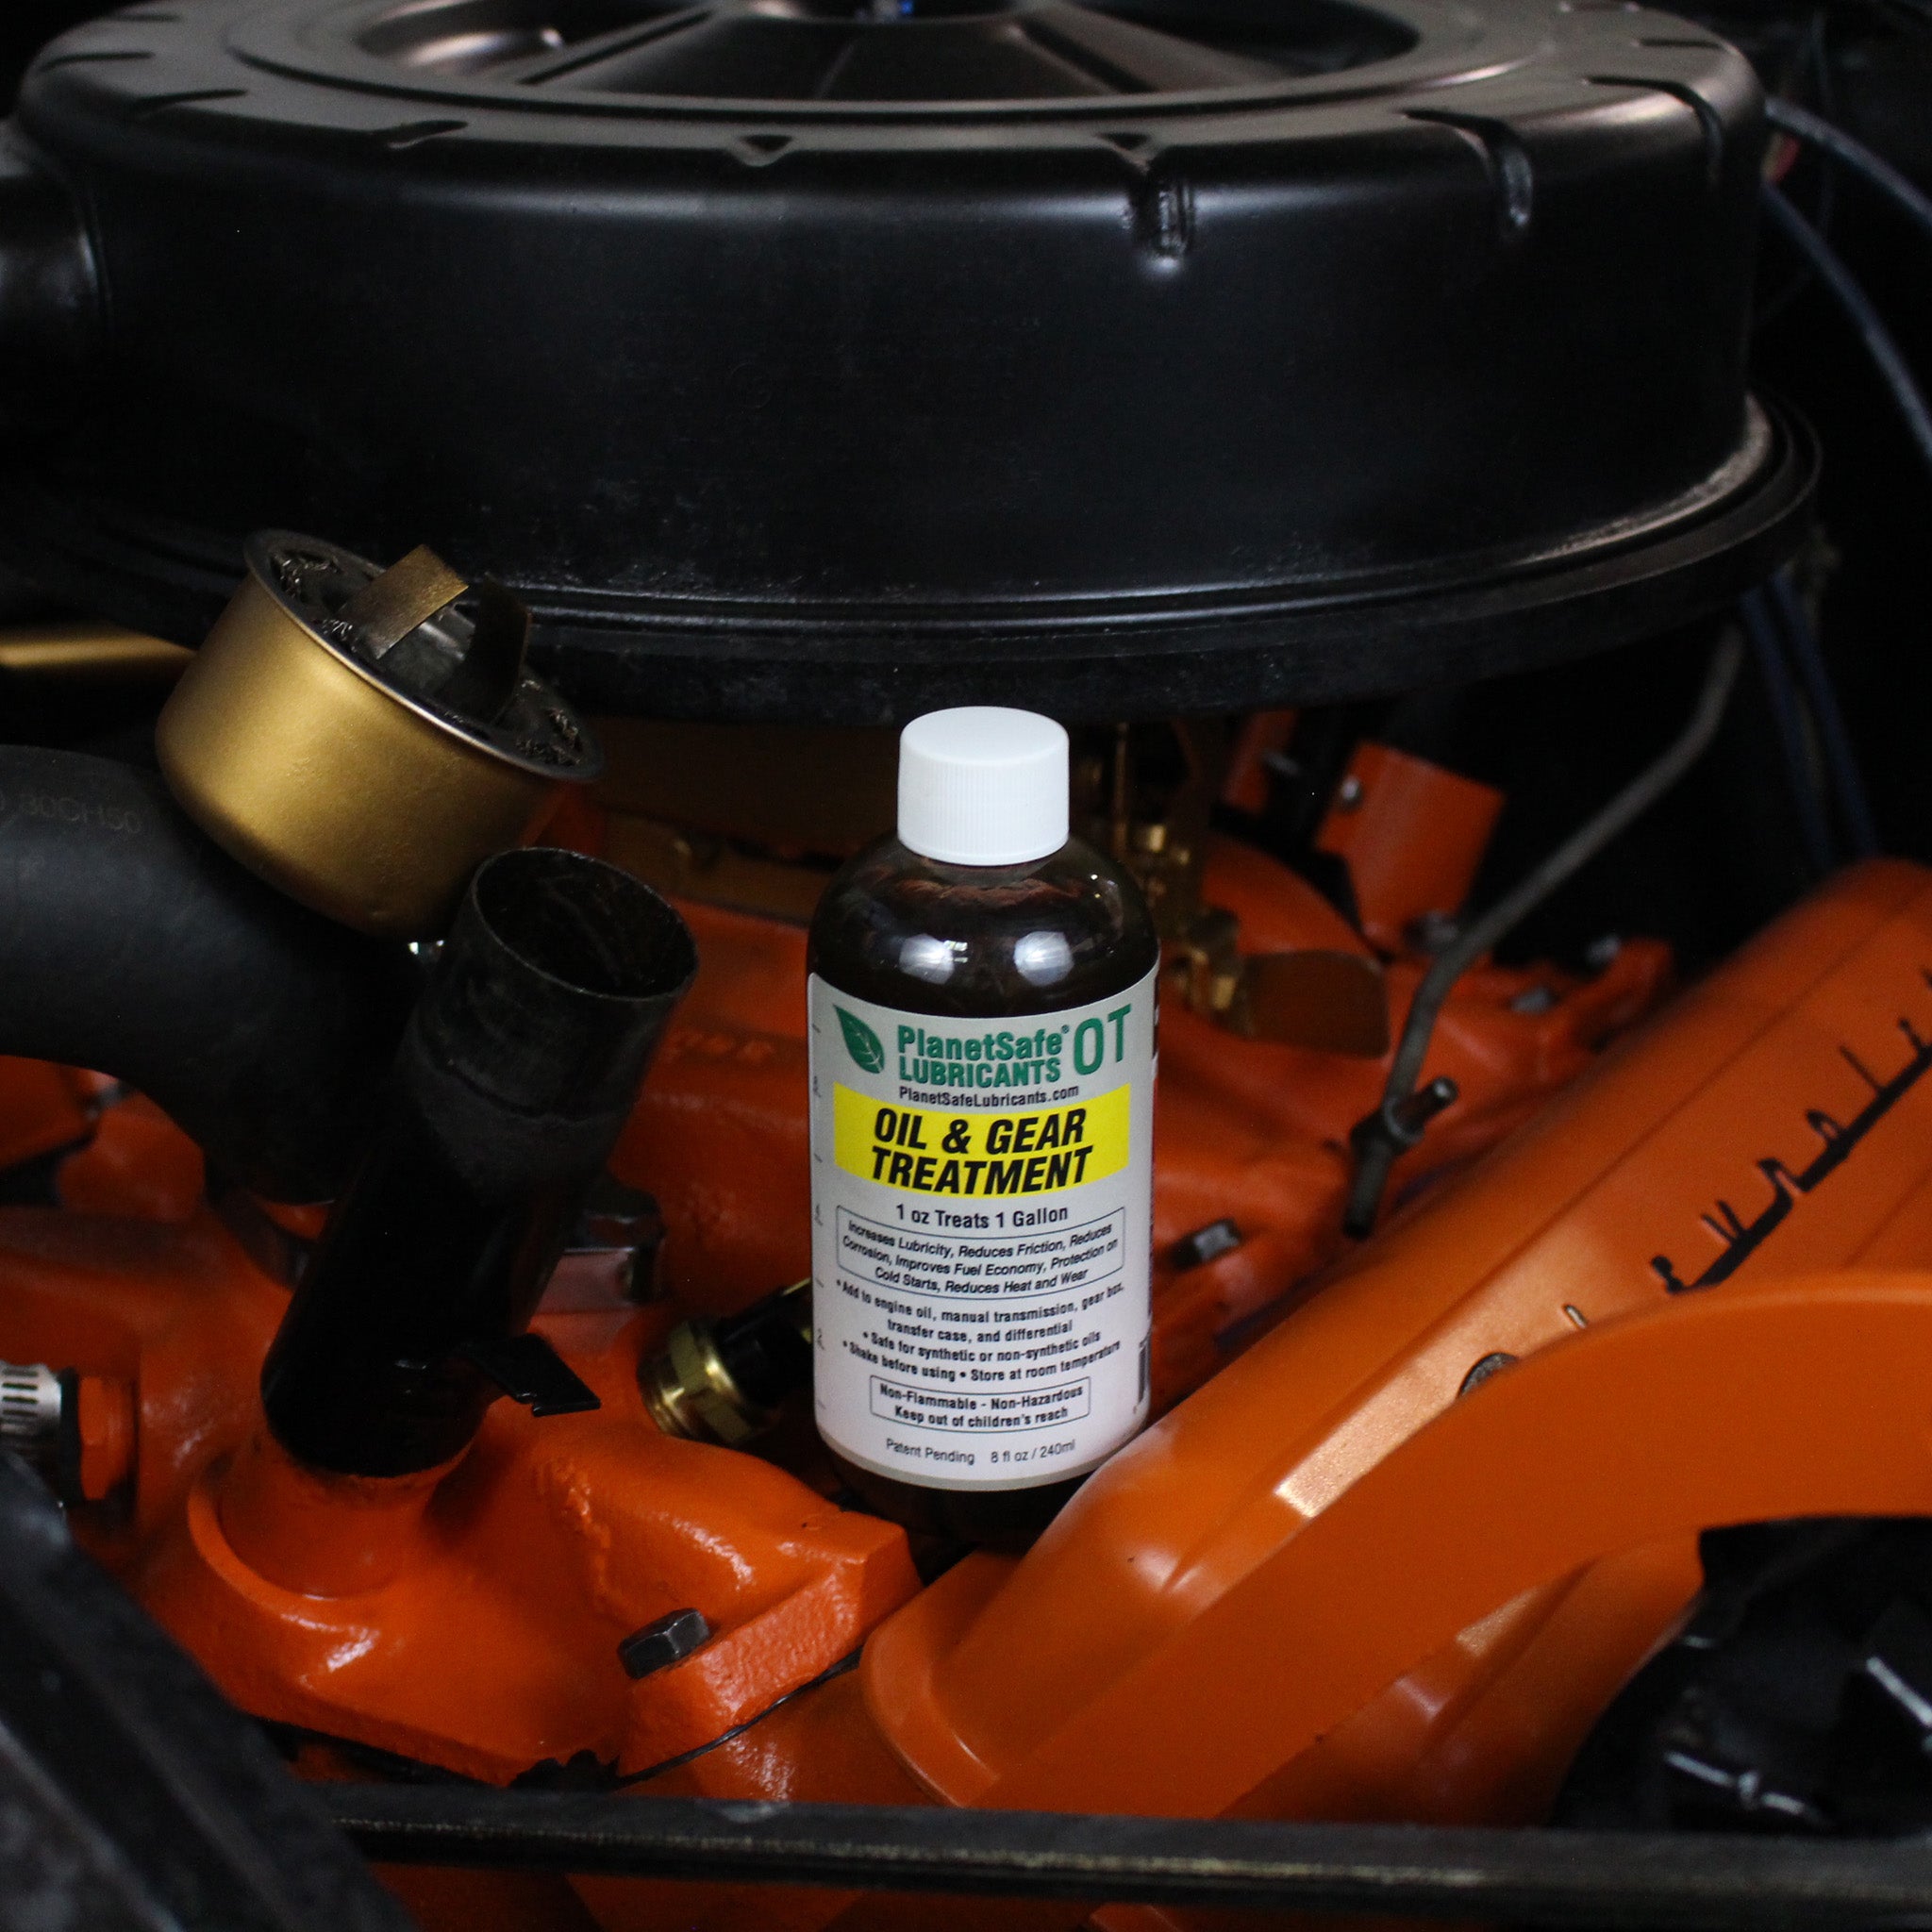 PlanetSafe Lubricants OT Oil Treatment 8oz-Oil and Gear Treatment-Worlds best- non-toxic- scientifically proven-oil treatment diesel engine additive